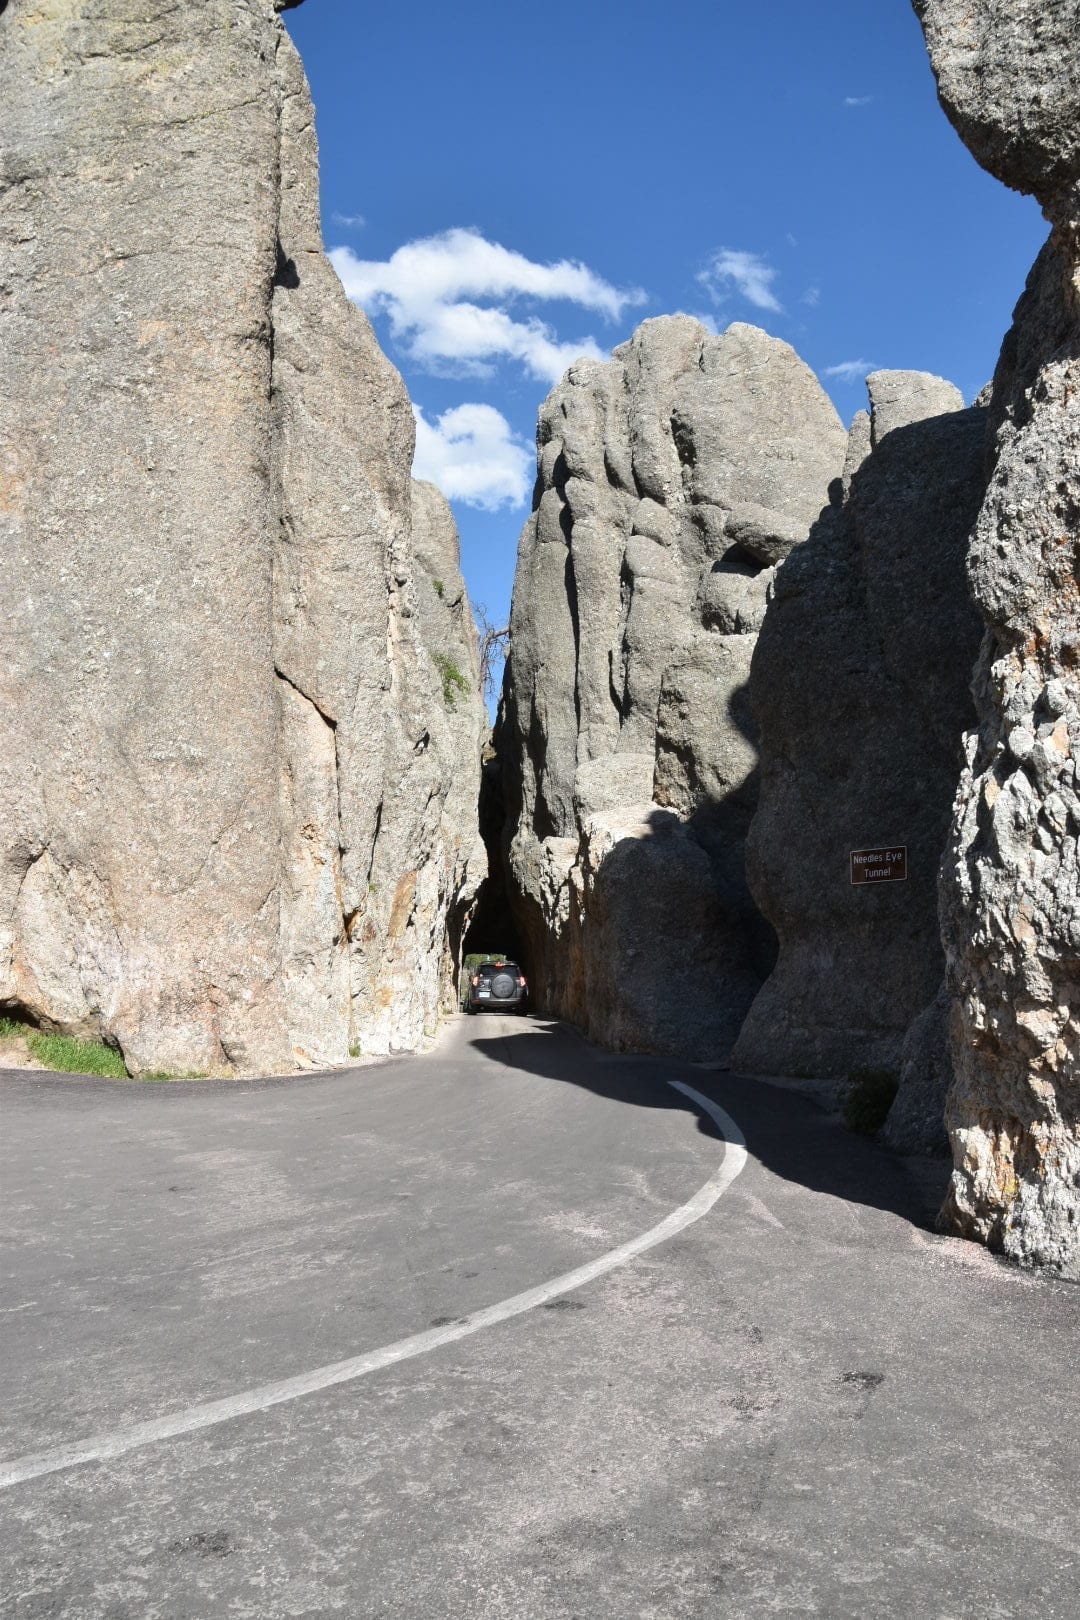 Needles Highway Tunnel at Custer State Park